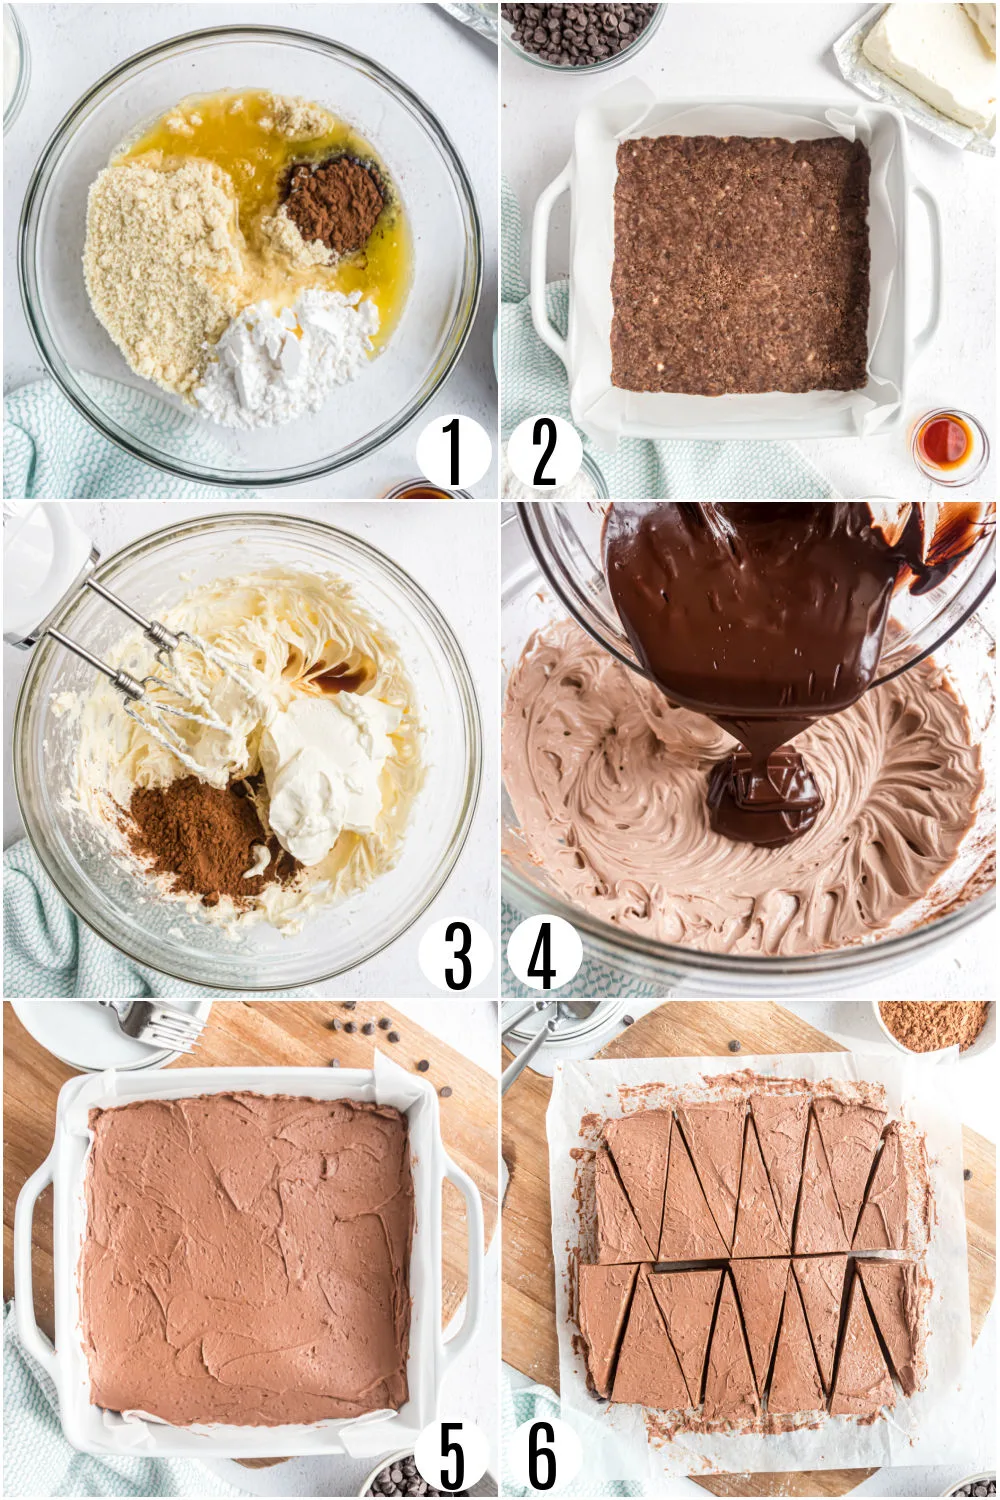 Step by step photos showing how to make chocolate cheesecake sugar free.